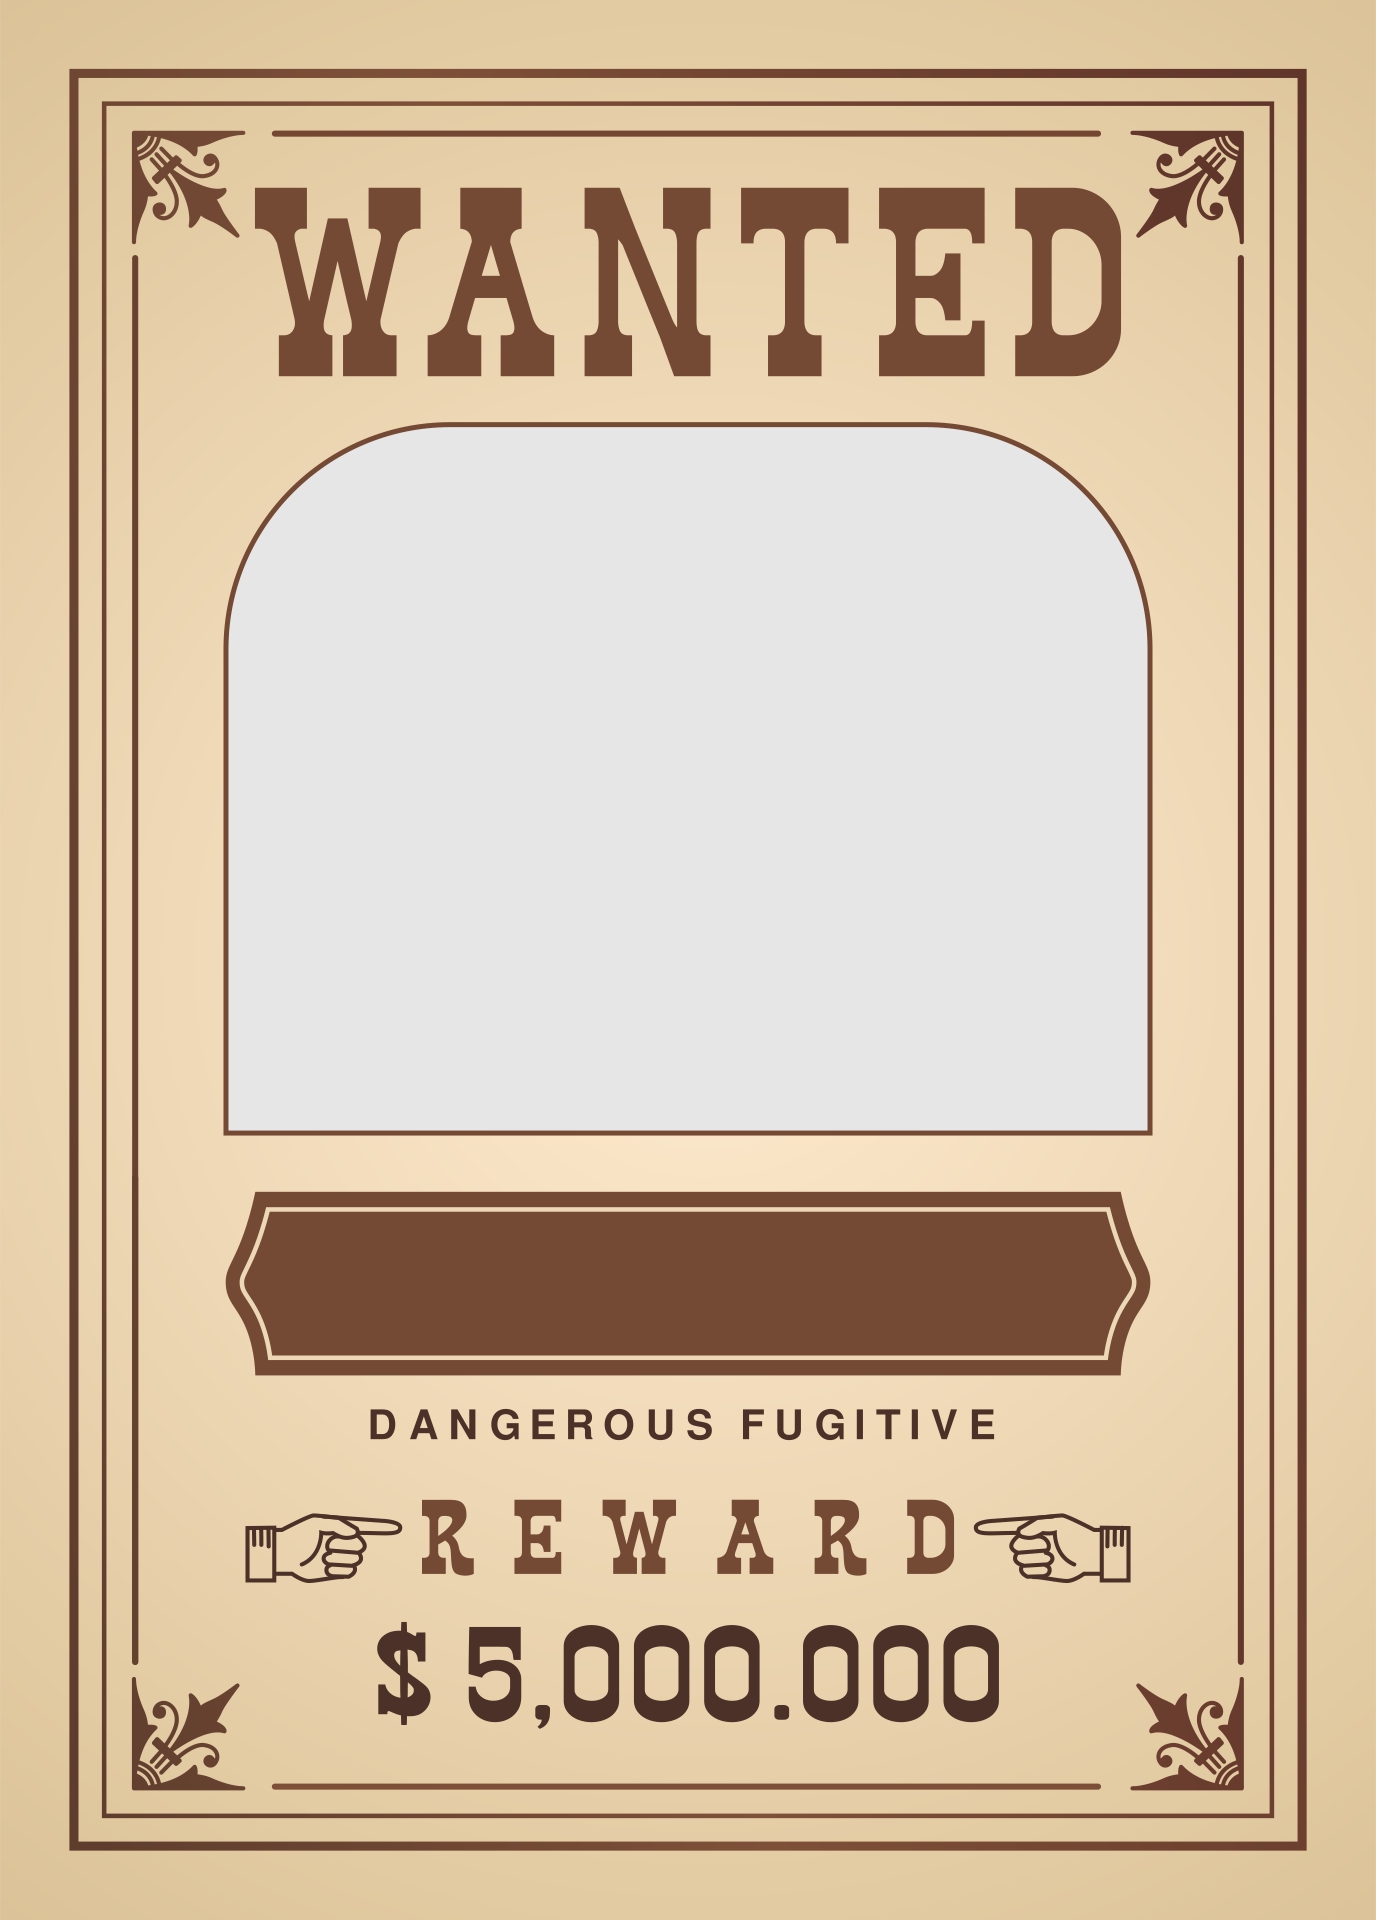 Old West Wanted Posters Template from www.printablee.com